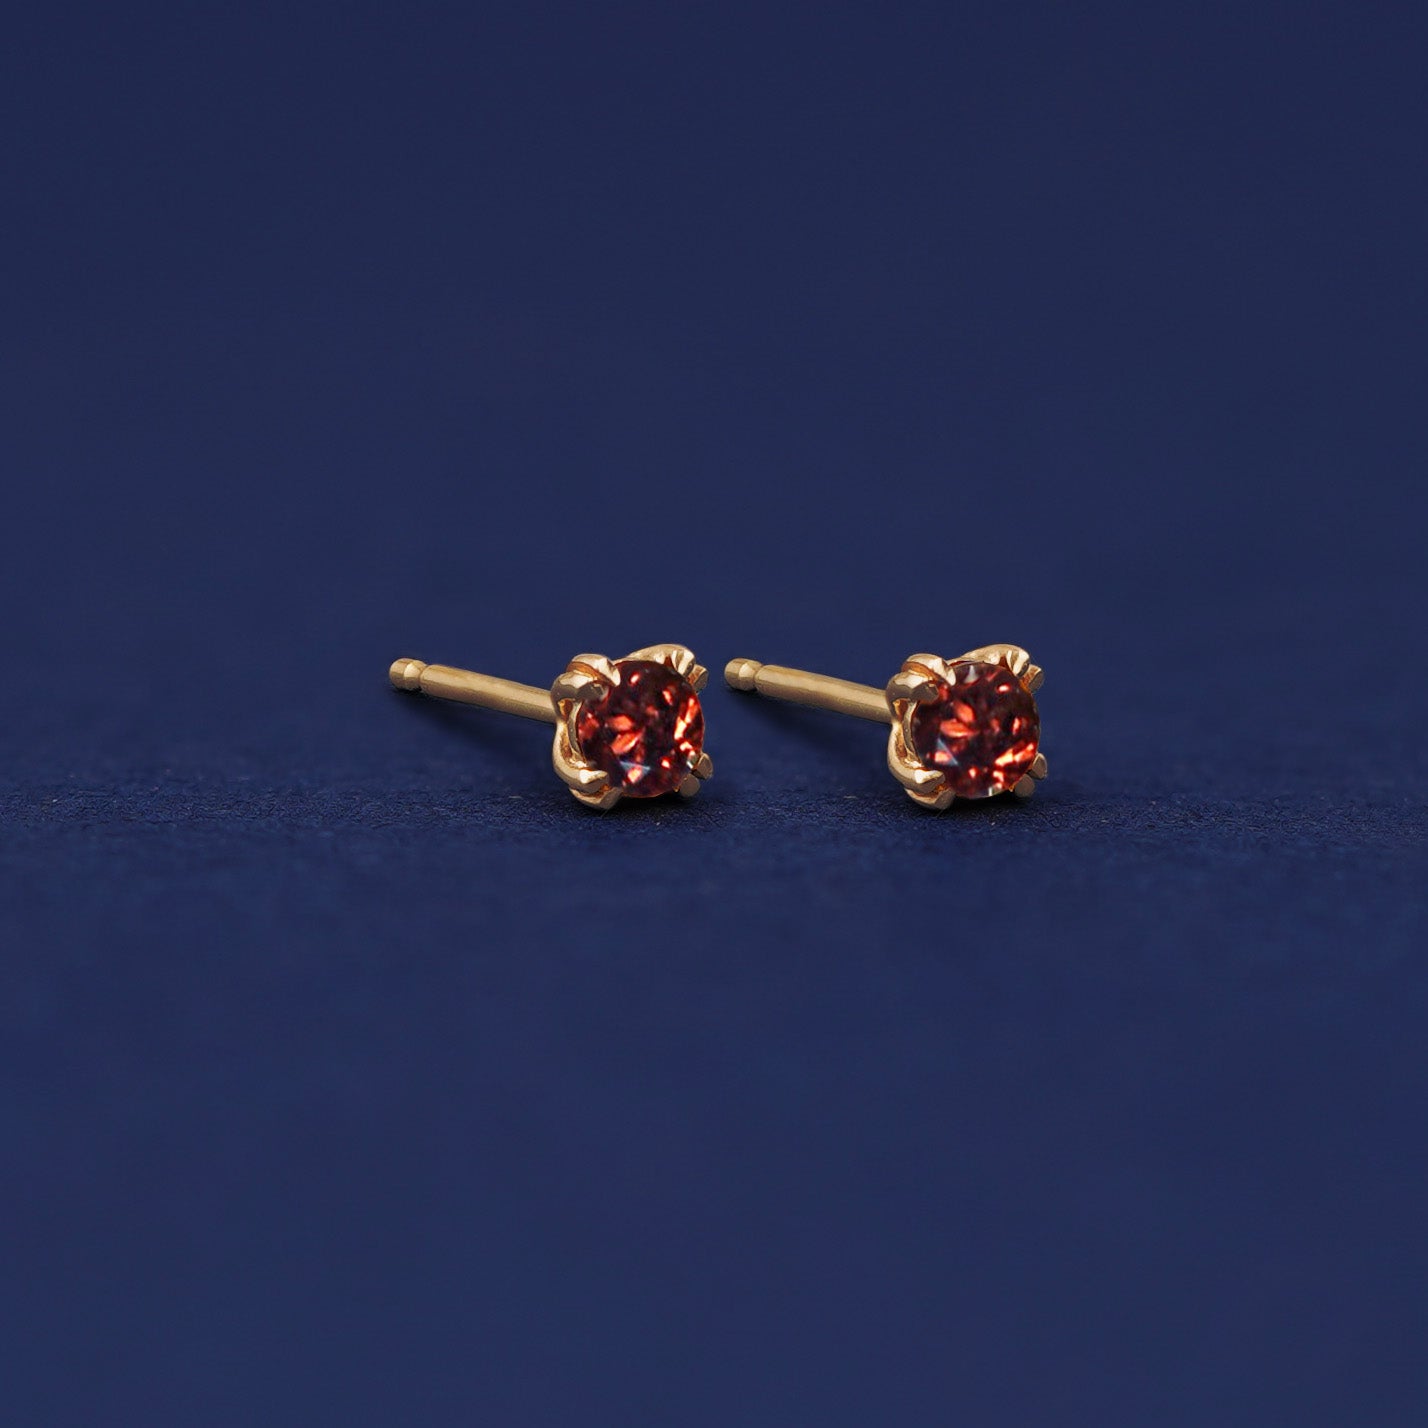 Yellow gold Garnet Earrings shown with 14k solid gold pushback post with no backings